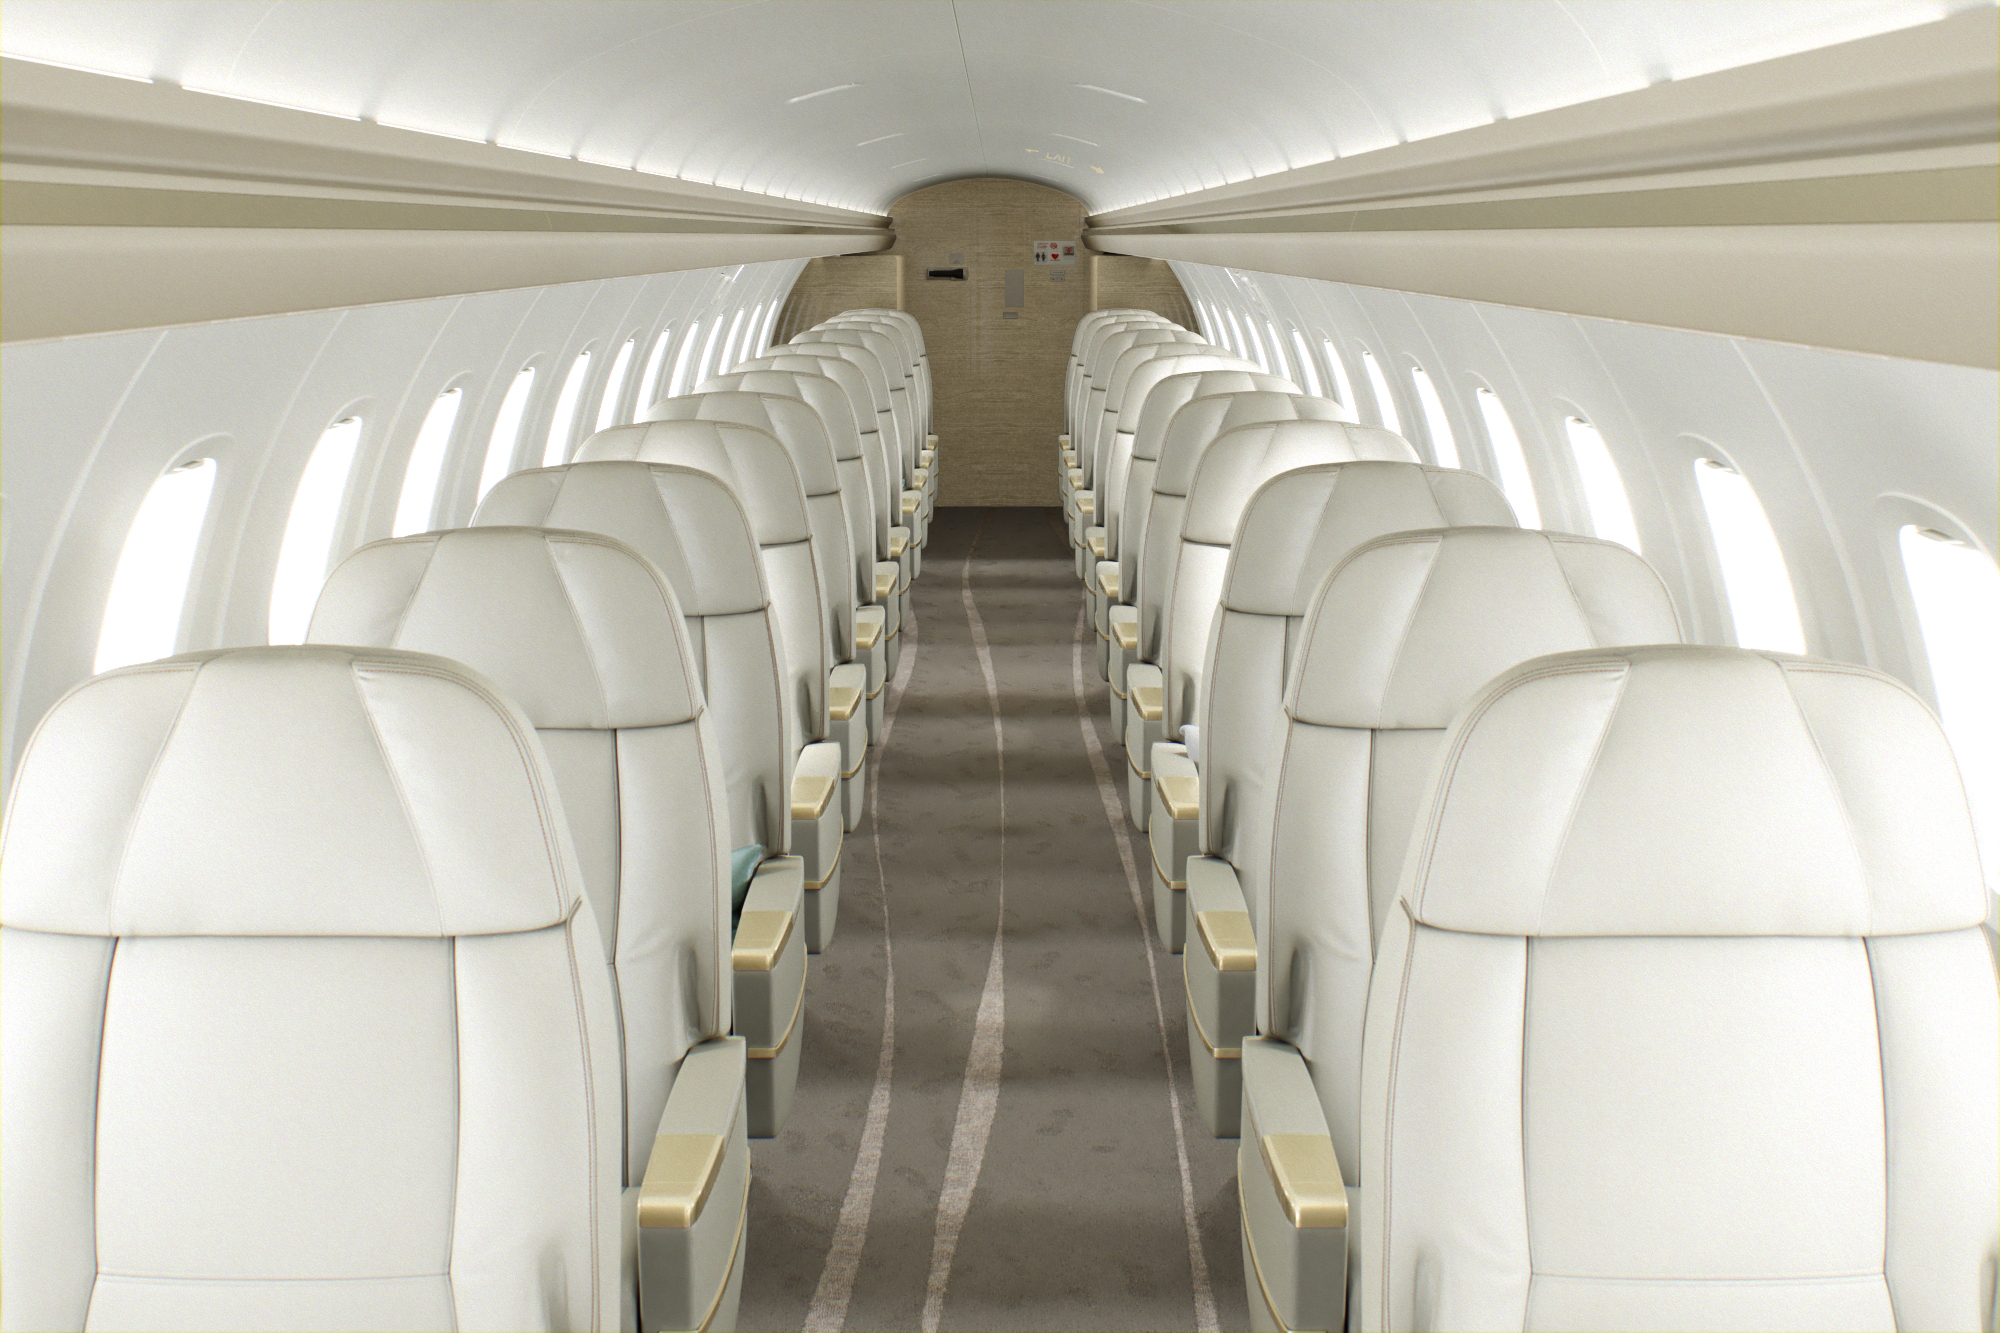 The 50-seat ERJ145 aircraft can now be configured from 16 to 28 premium seats with one seat configuration on each side of the aisle, increasing social distancing and comfort. Click to enlarge.